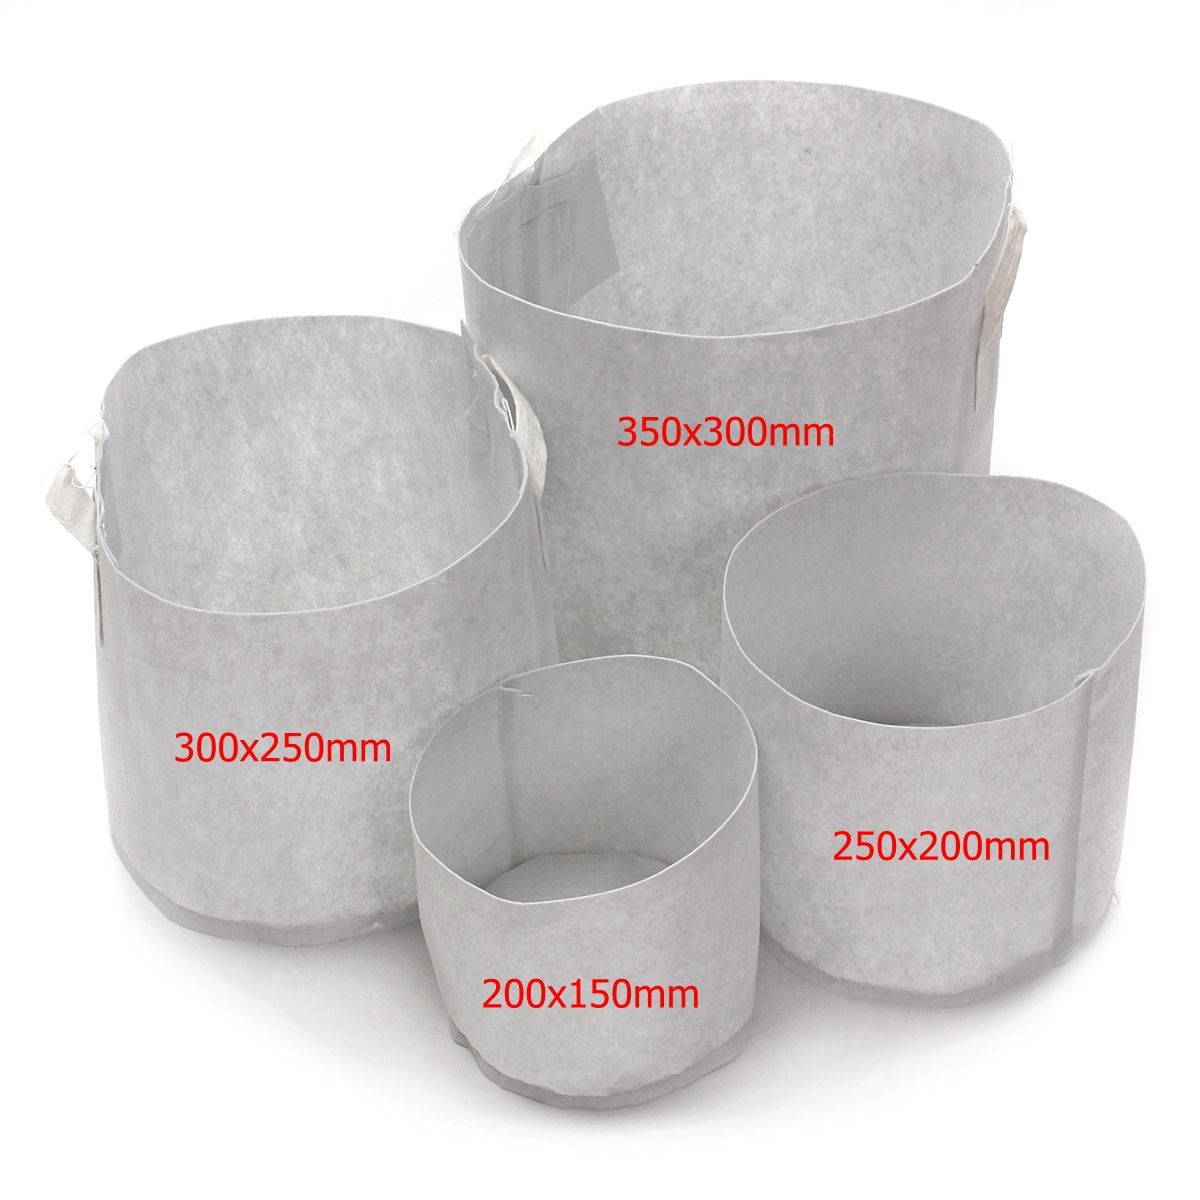 10Pcs-Eco-Friendly-Round-Fabric-Pot-Planting-Pouch-Root-Grow-Aeration-Container-Seedling-Bag-Box-1172091